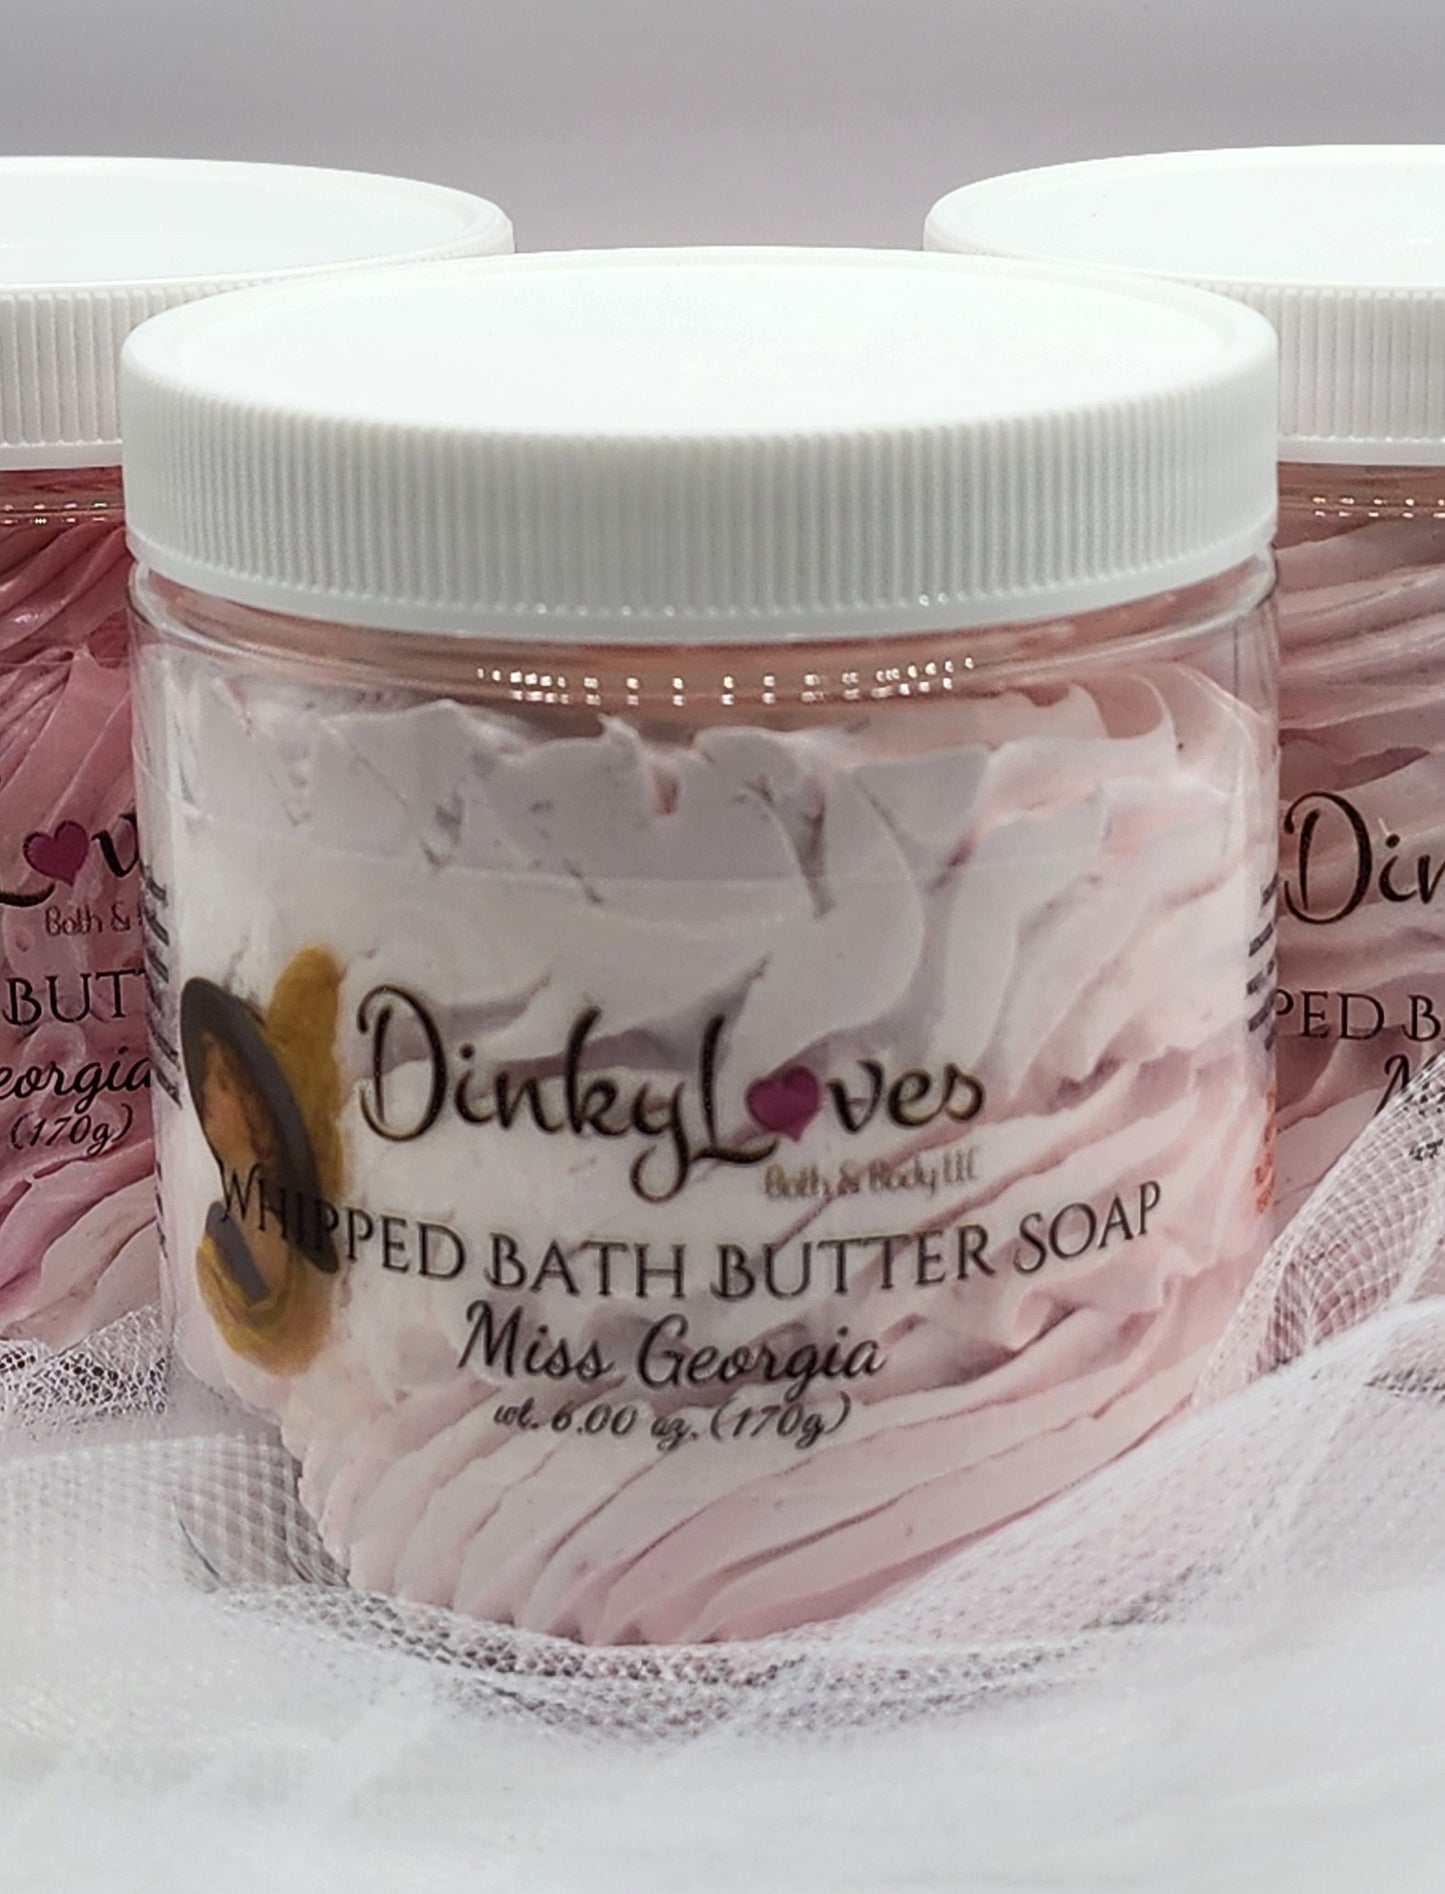 MISS GEORGIA Whipped Bath Butter Soap / Gift Idea / Luxury Product / Cocoa Butter